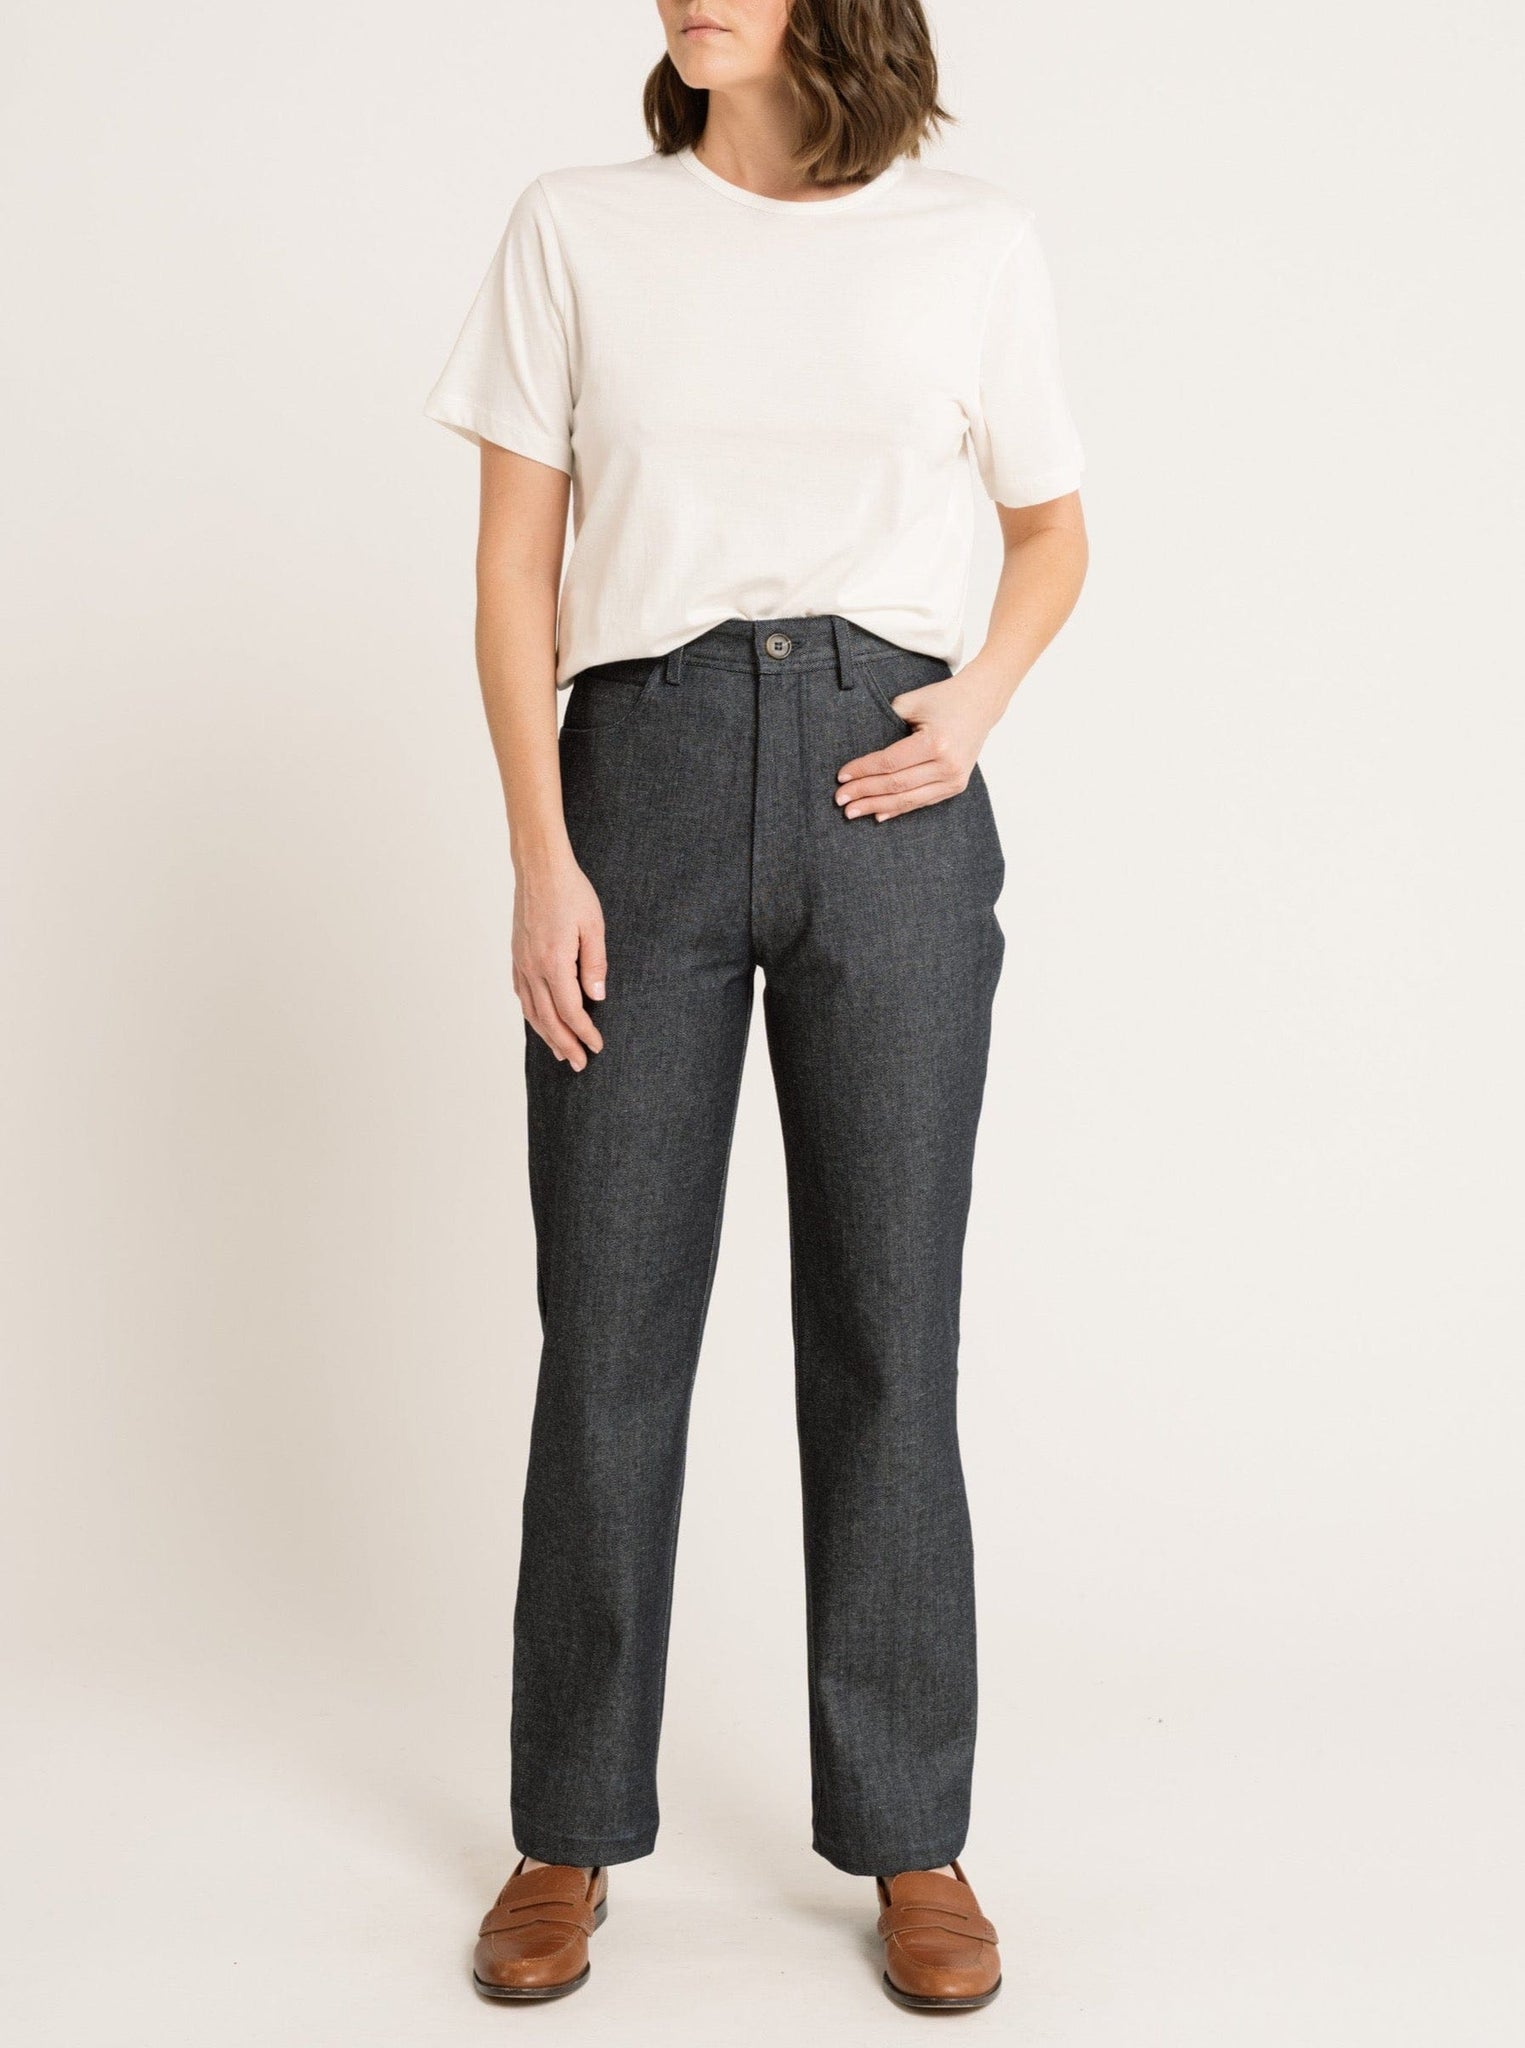 A woman wearing a white t-shirt made of organic cotton and Camp Pant - Vintage Denim - Sample.